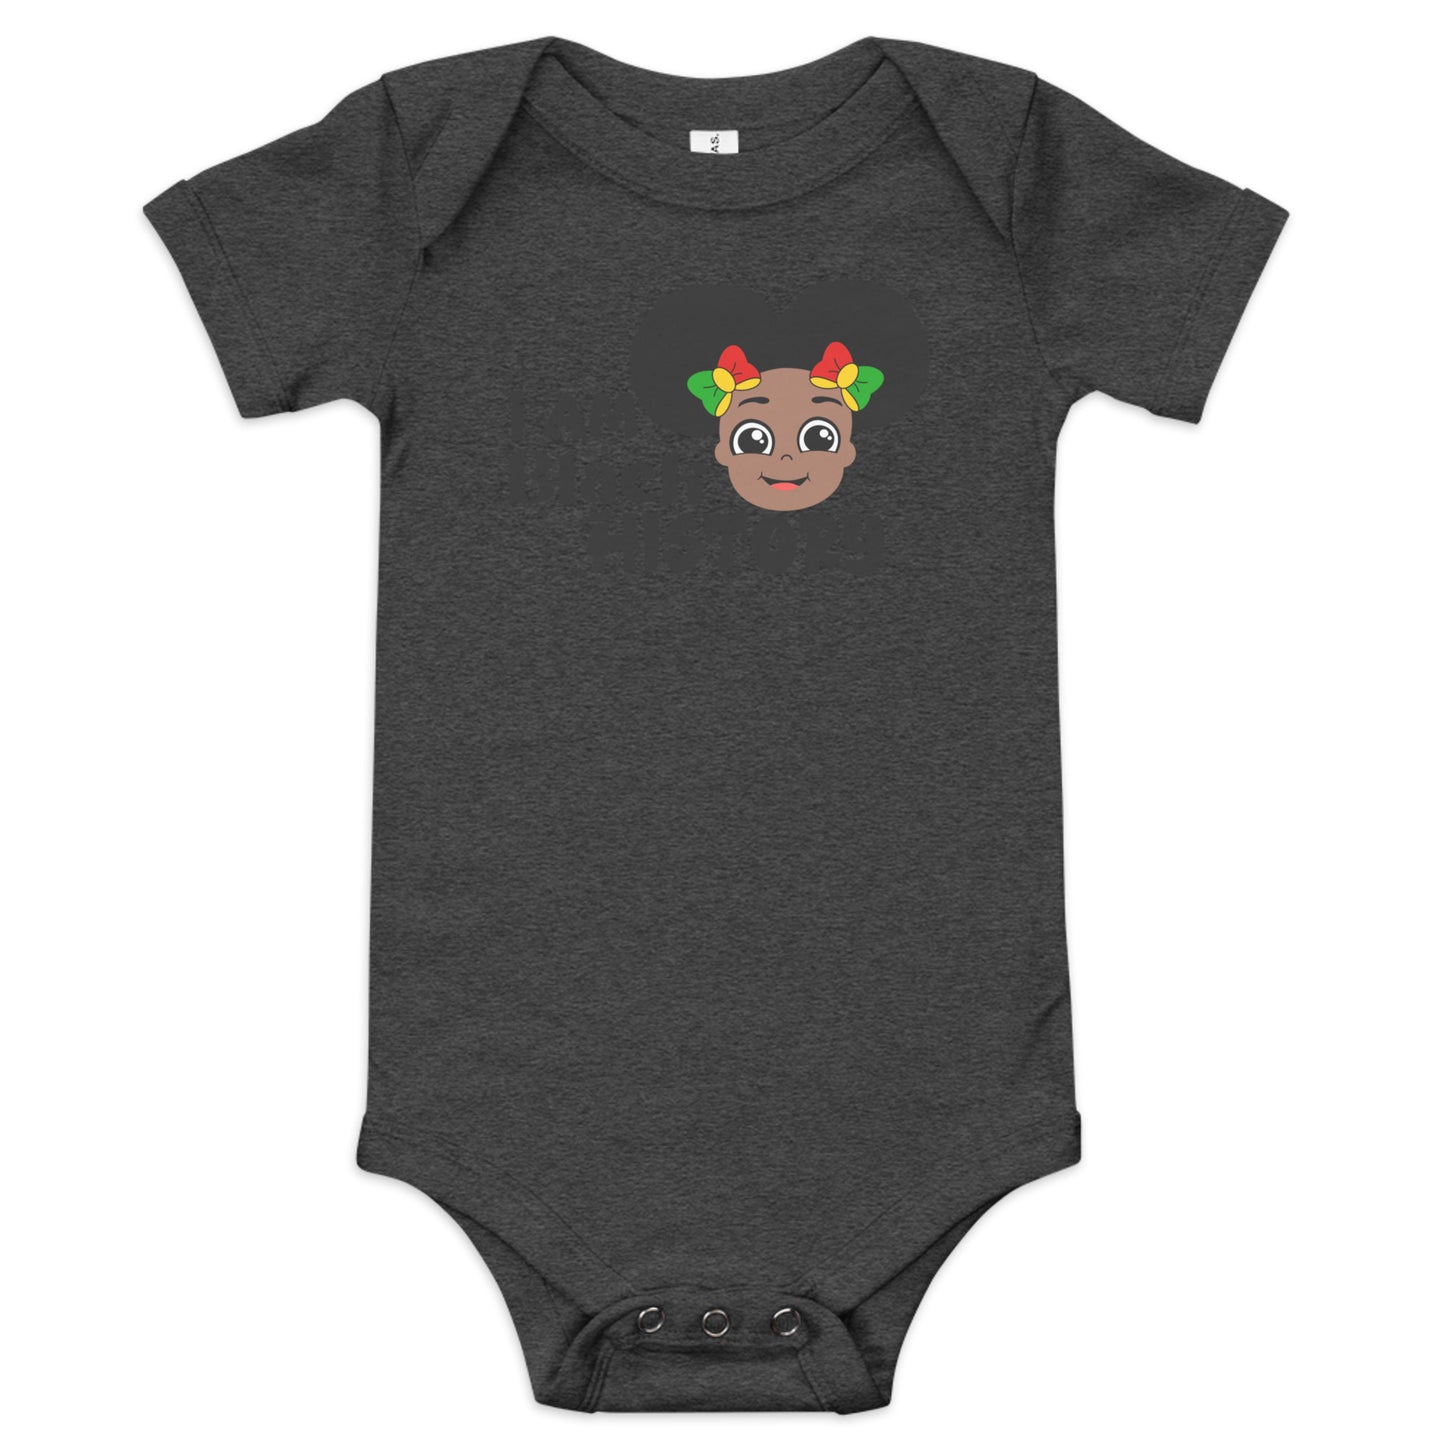 Baby short sleeve one piece - I  Am Black History (Girl with Afro Puffs)